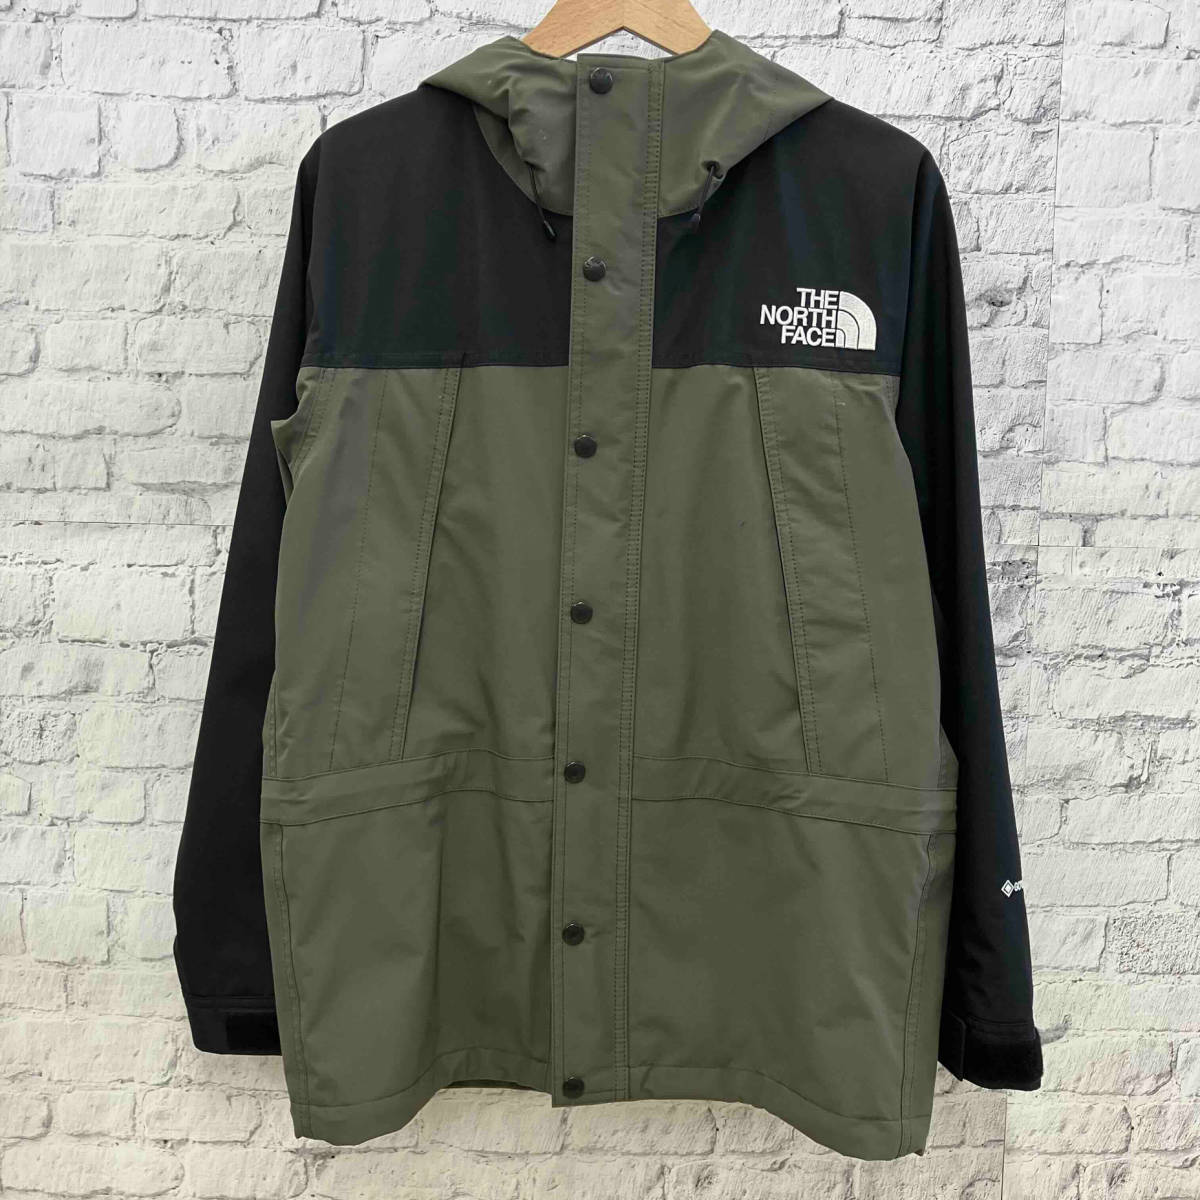 THE NORTH FACE MOUNTAIN LIGHT JACKET NEW TAUPE ザノースフェイス マウンテン ライト ジャケット NP11834 サイズS